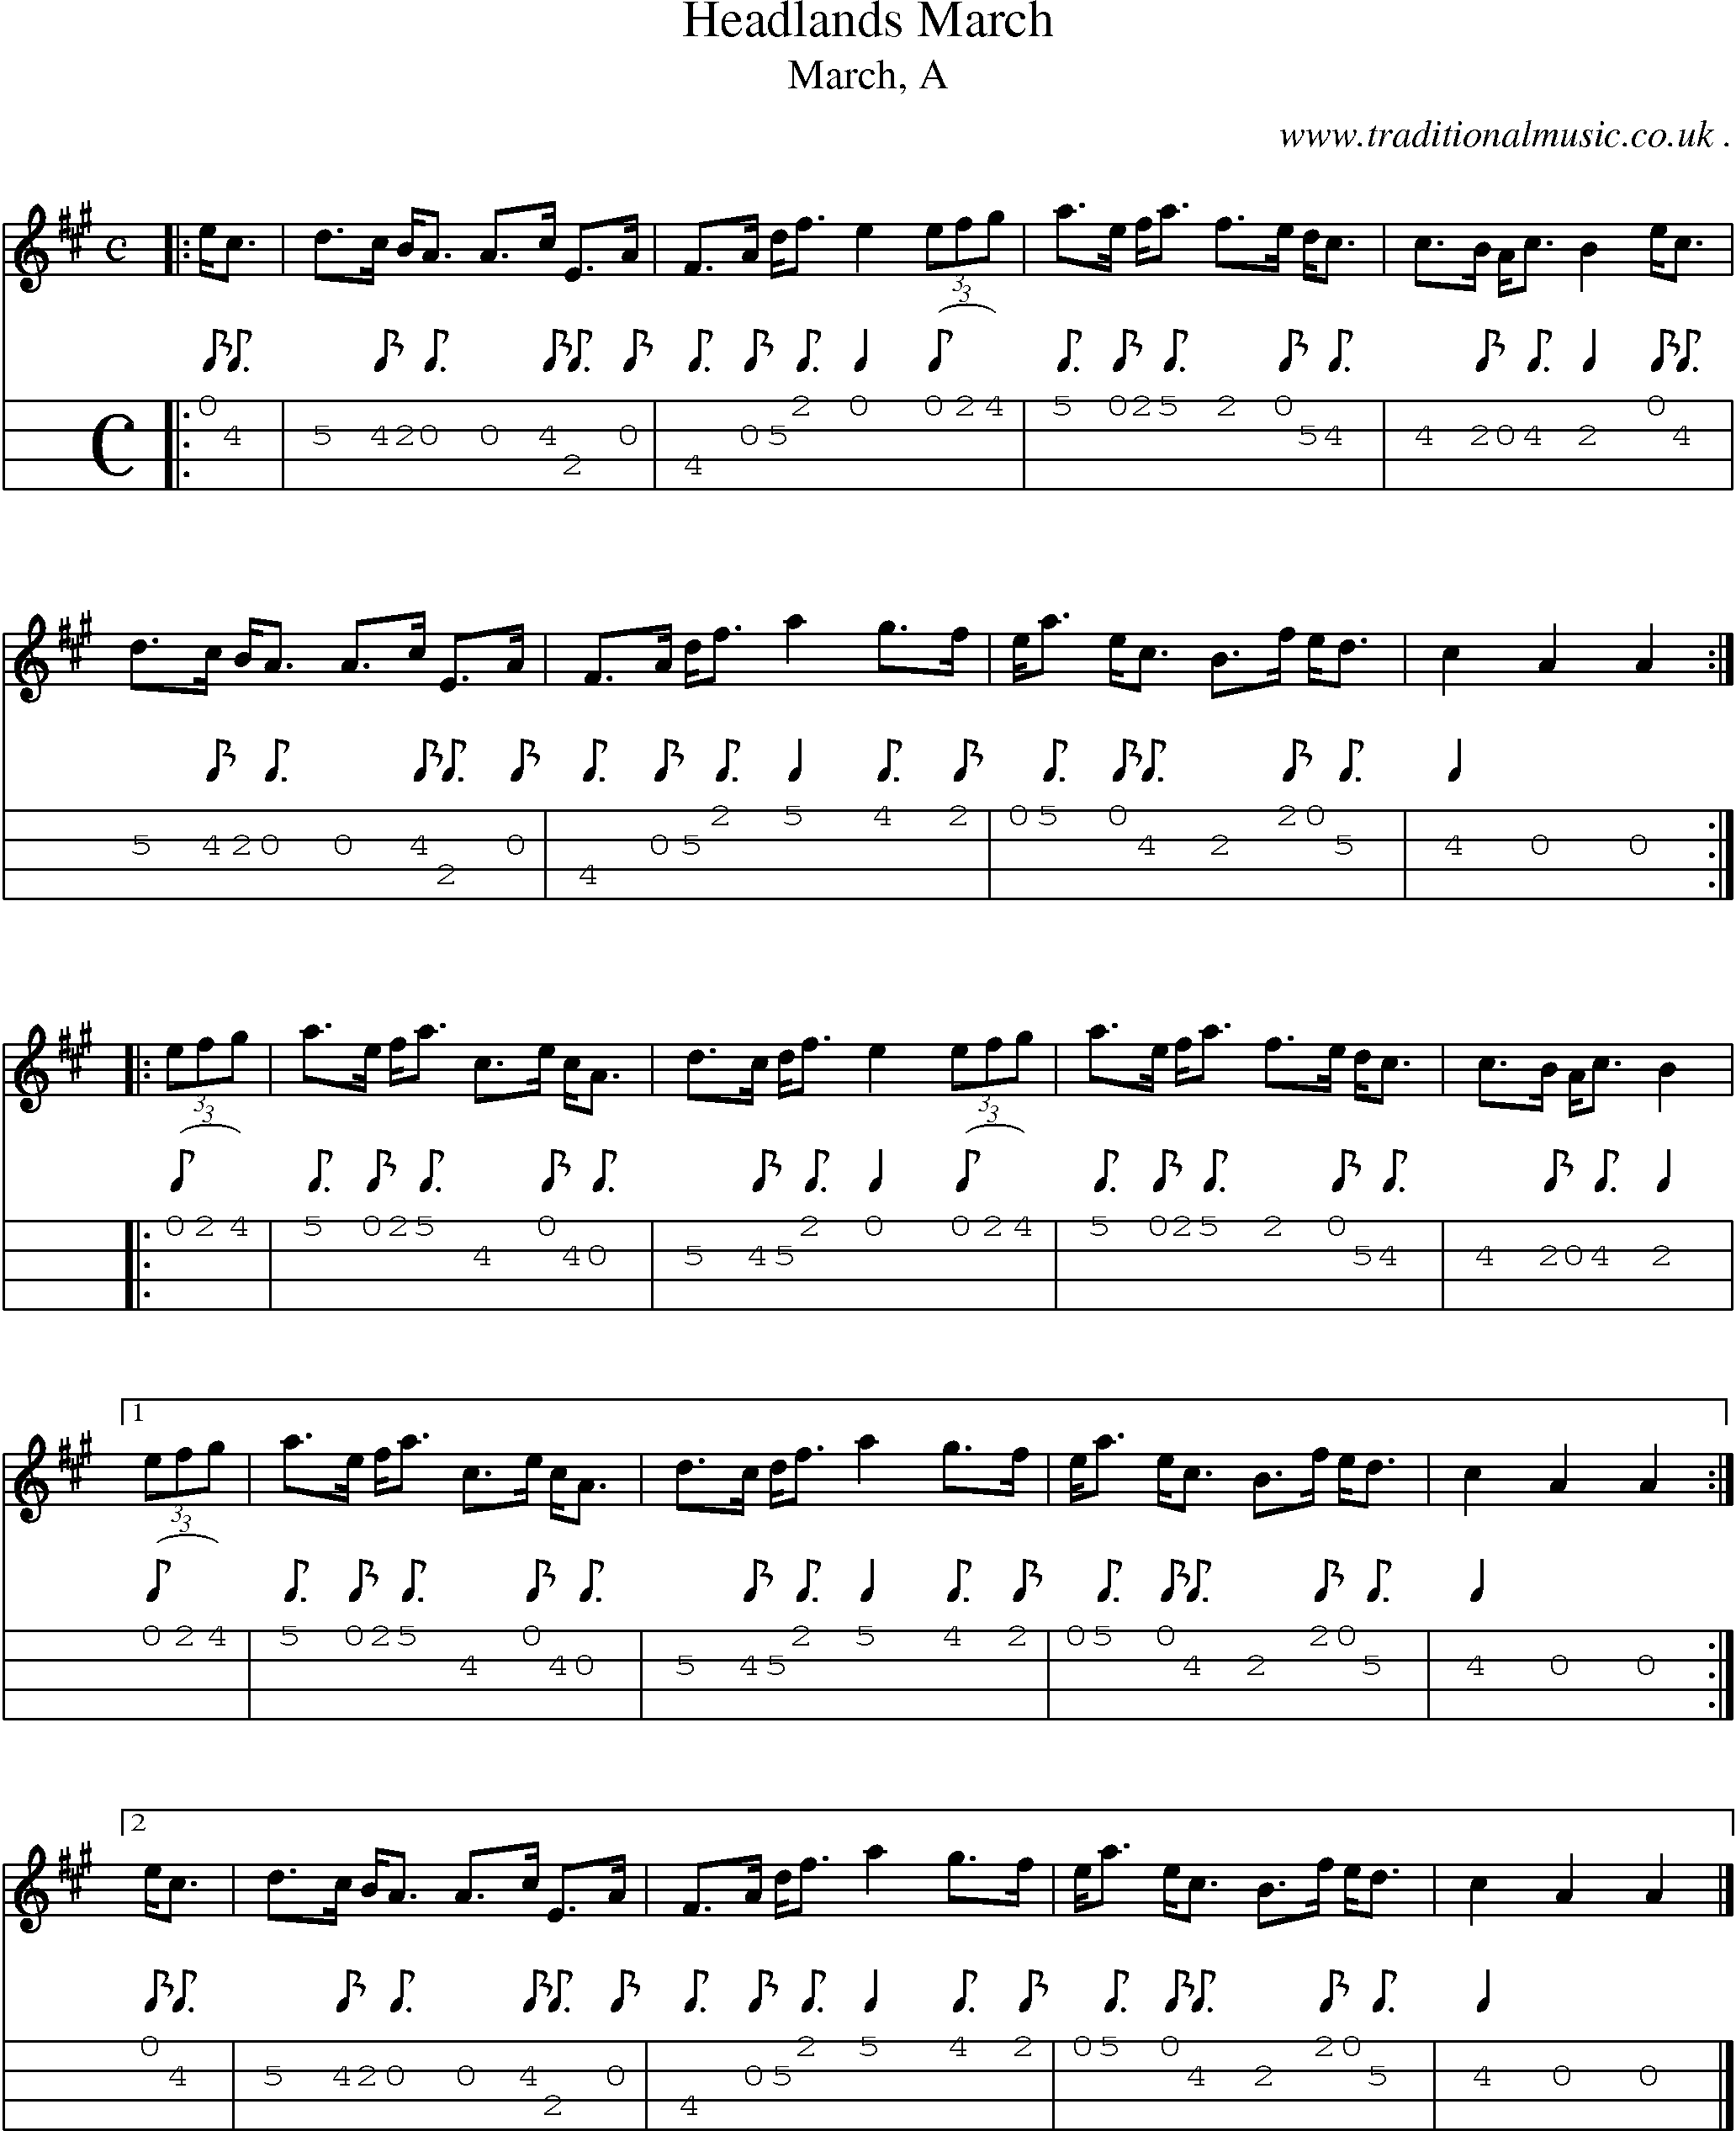 Sheet-music  score, Chords and Mandolin Tabs for Headlands March